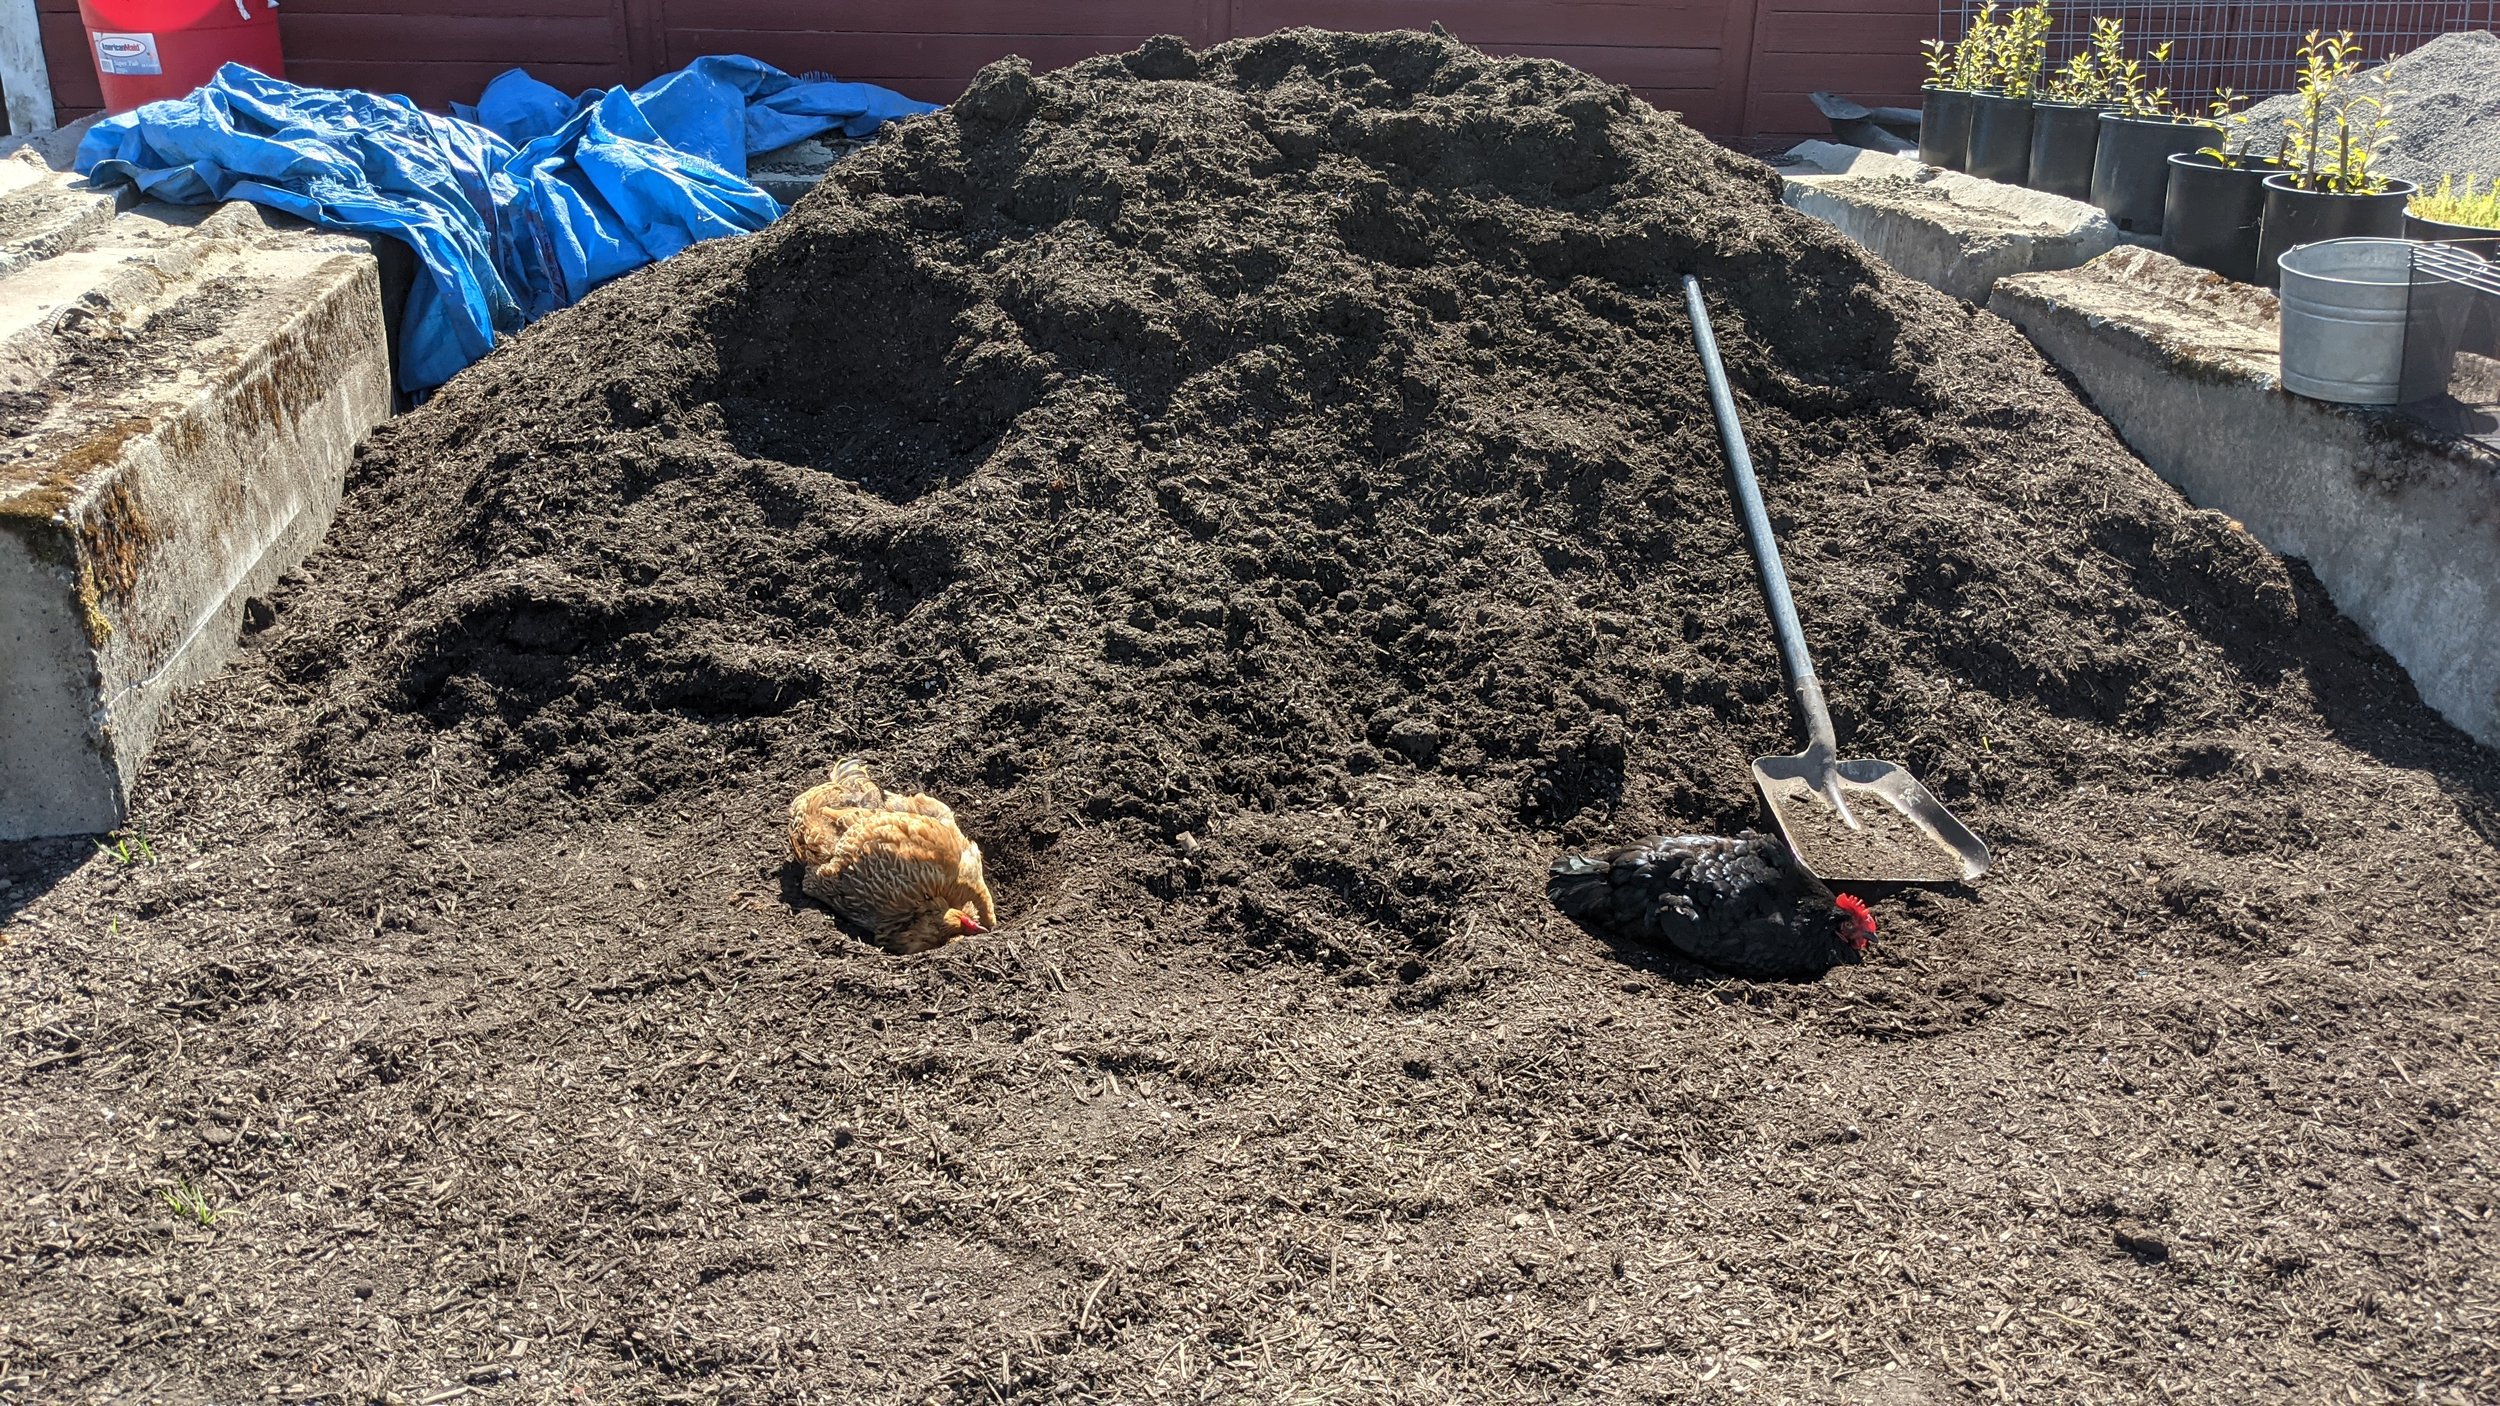  Clyde also loves to hang out with Bonnie on the dirt piles. 